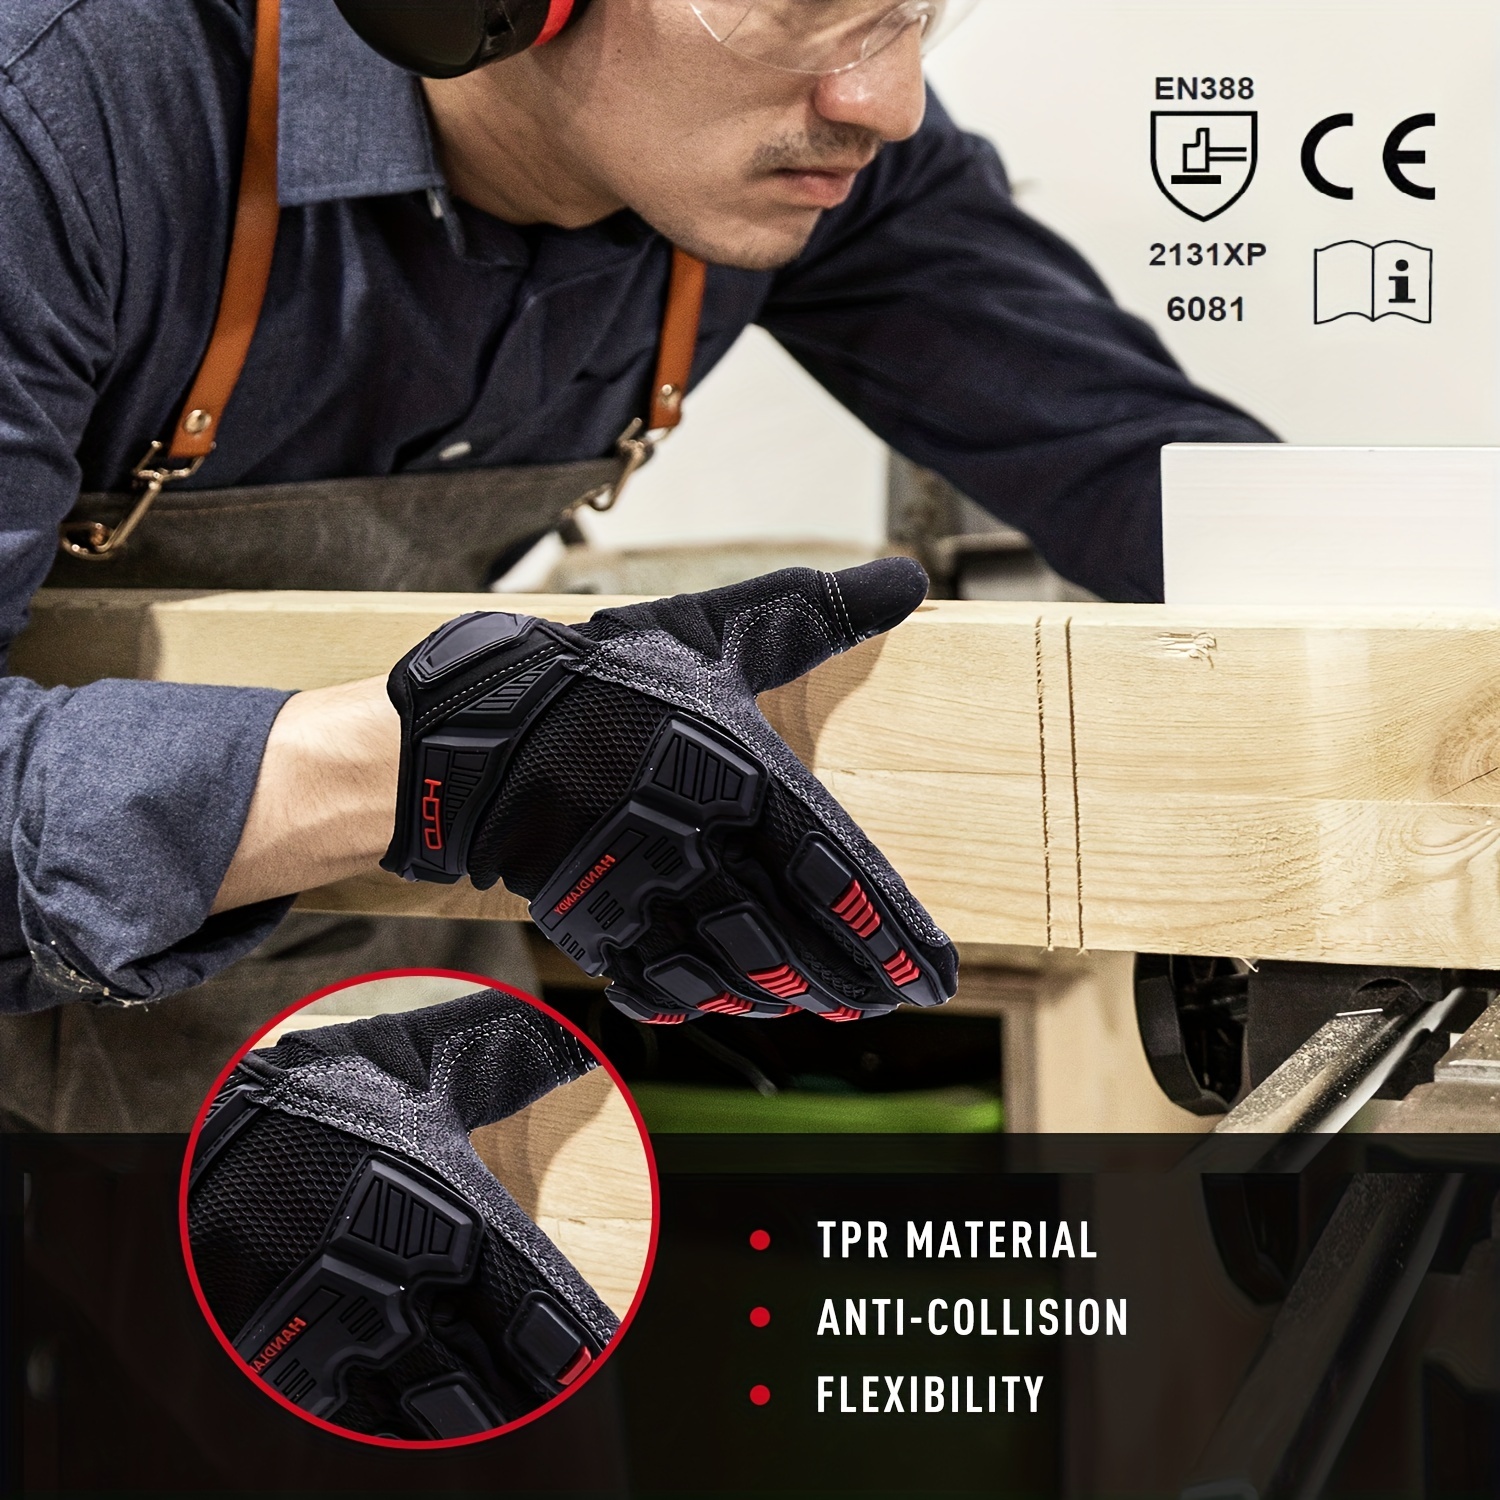 The Original Durable Mechanic Work Gloves with Secure Fit, Flexible Grip  for Men - China Mechanic Glove and Mechanic Work Gloves price